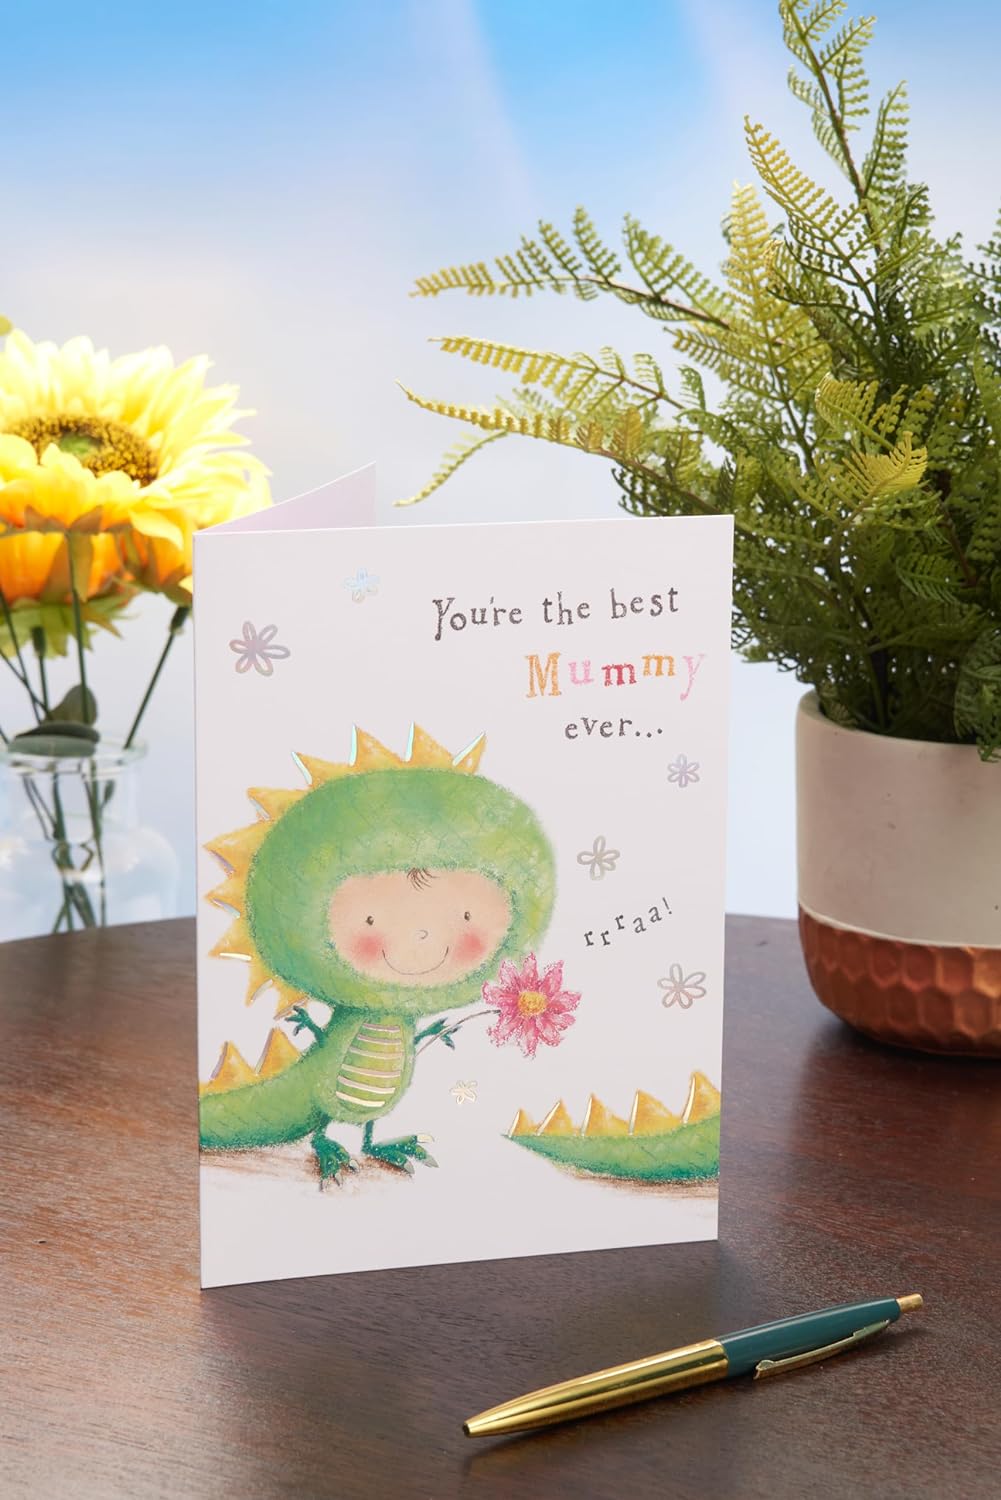 Cute Dino Design Mother's Day Card